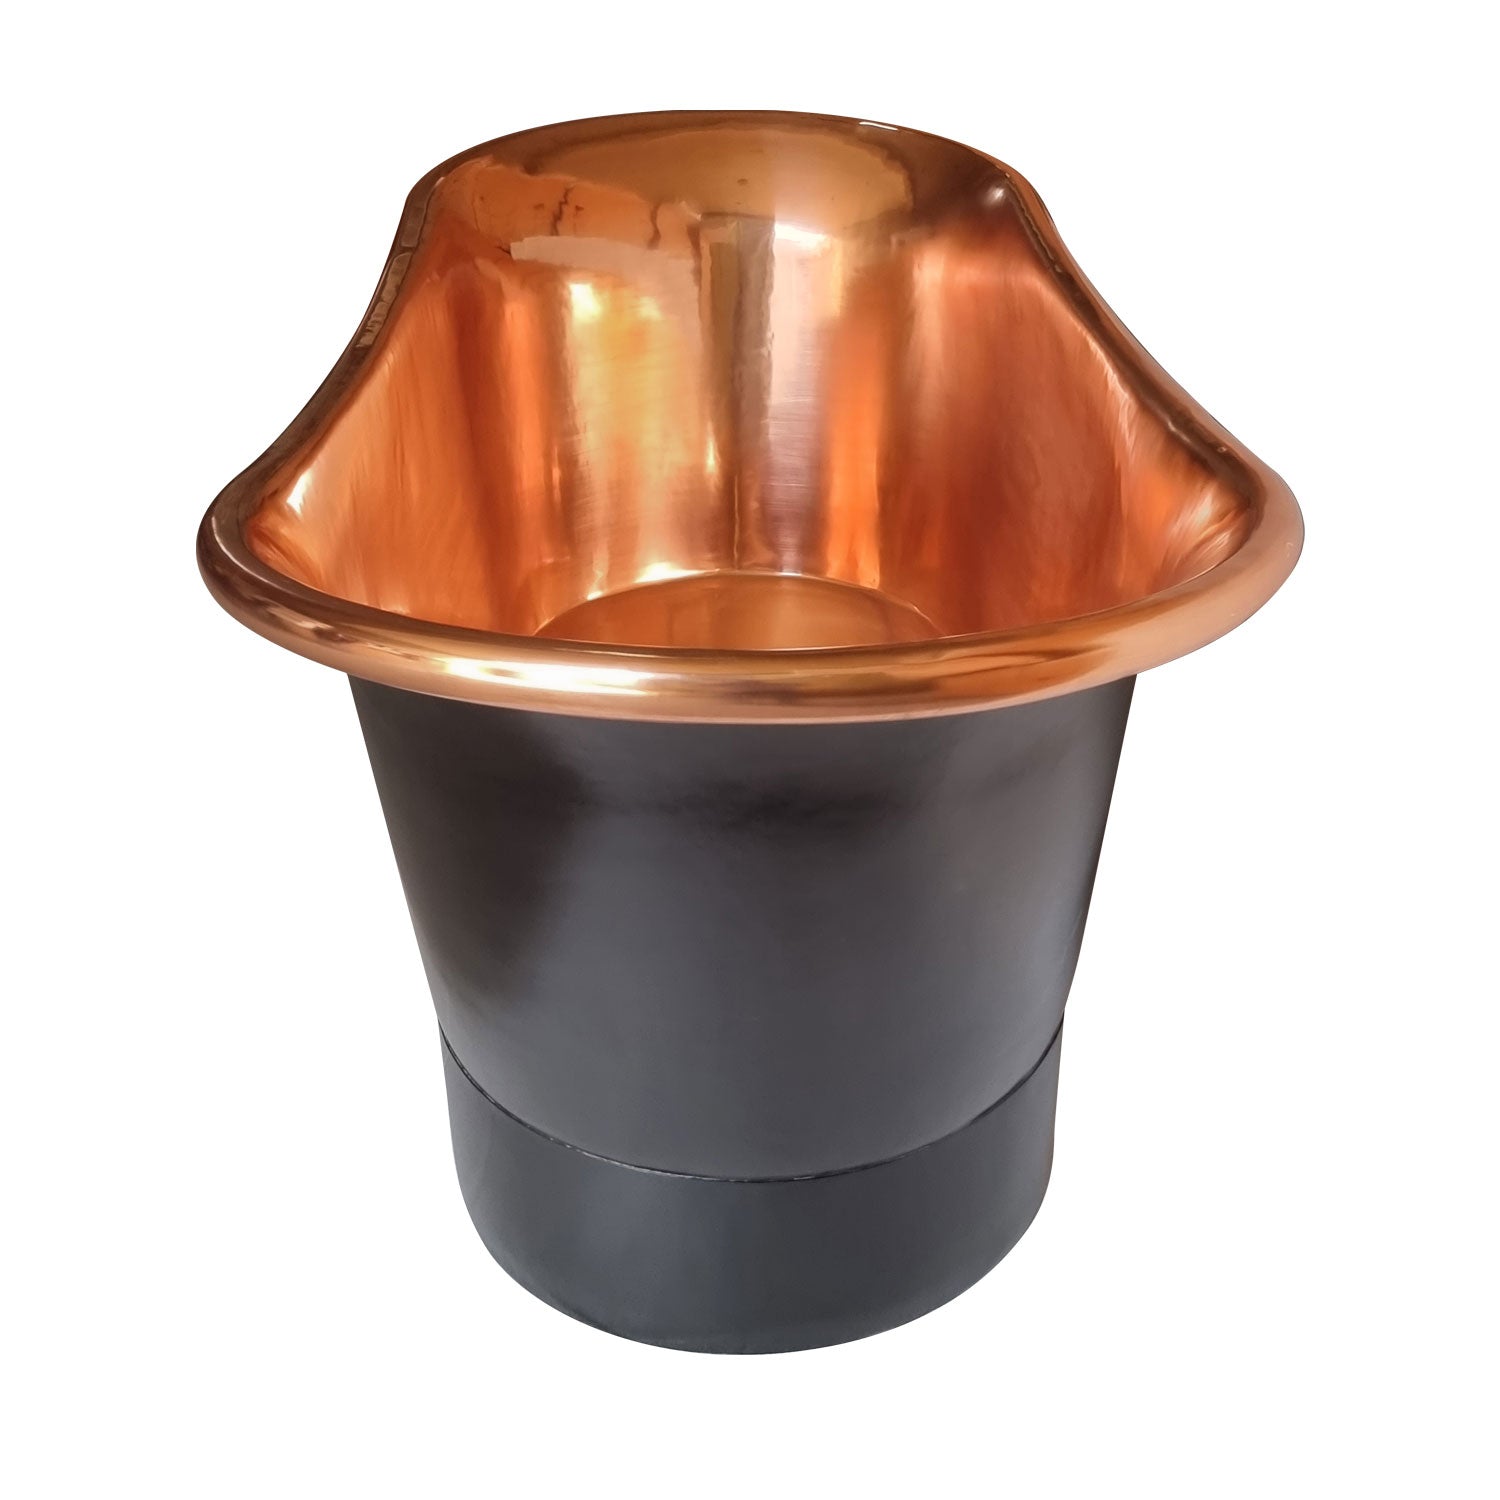 Coppersmith Creations Copper Black Straight Base Freestanding Bath